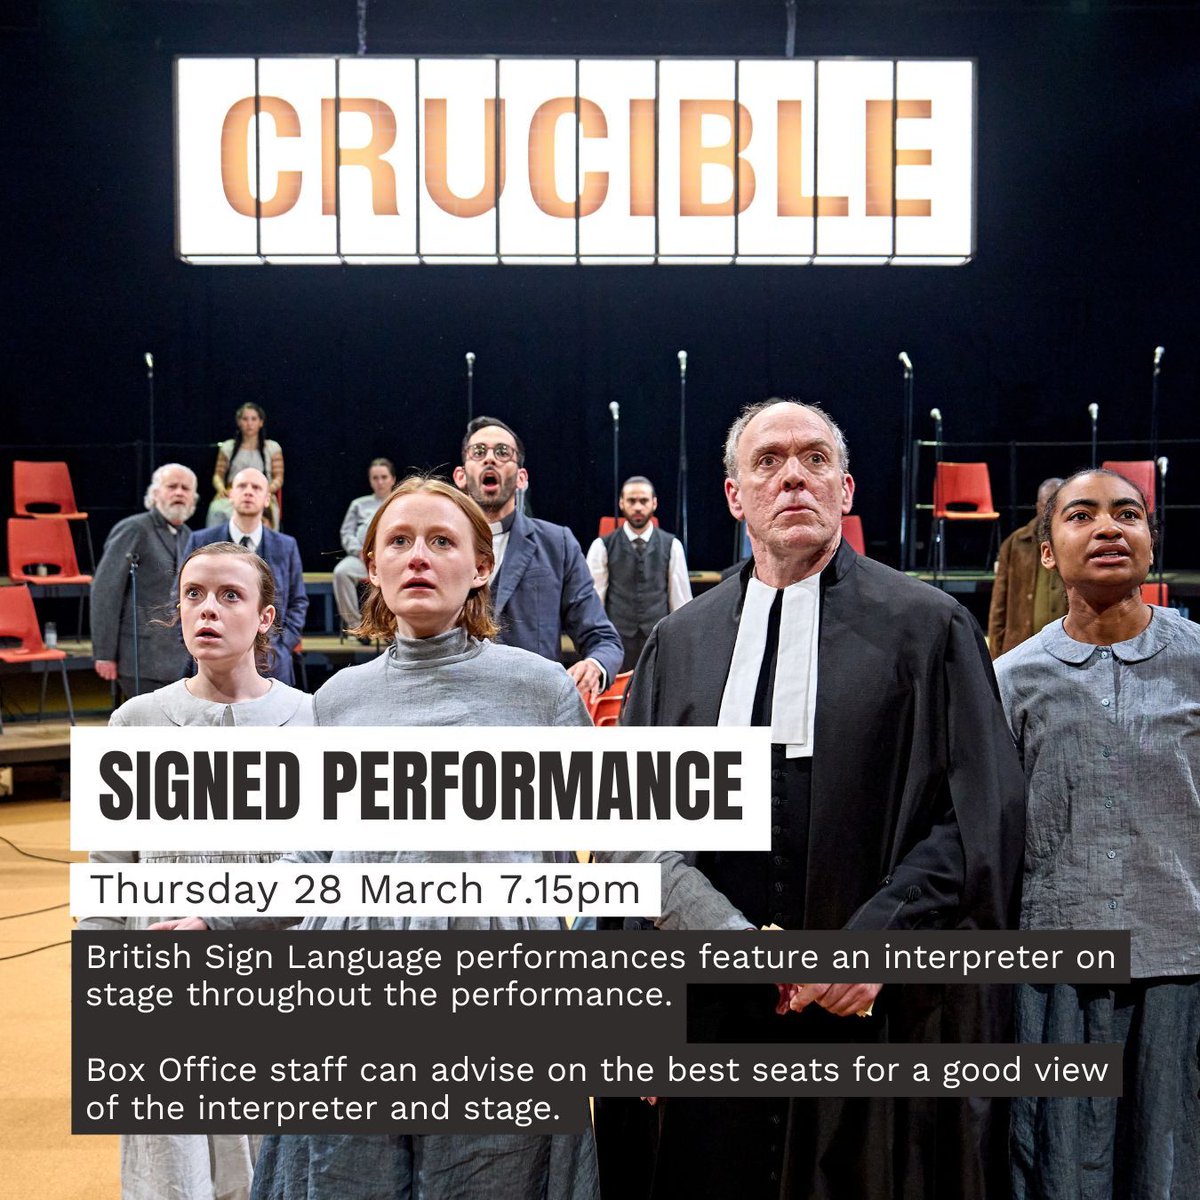 Our accessible performances of The Crucible continue from this weekend! Find out more about our accessible performances of The Crucible here: buff.ly/497ByU3